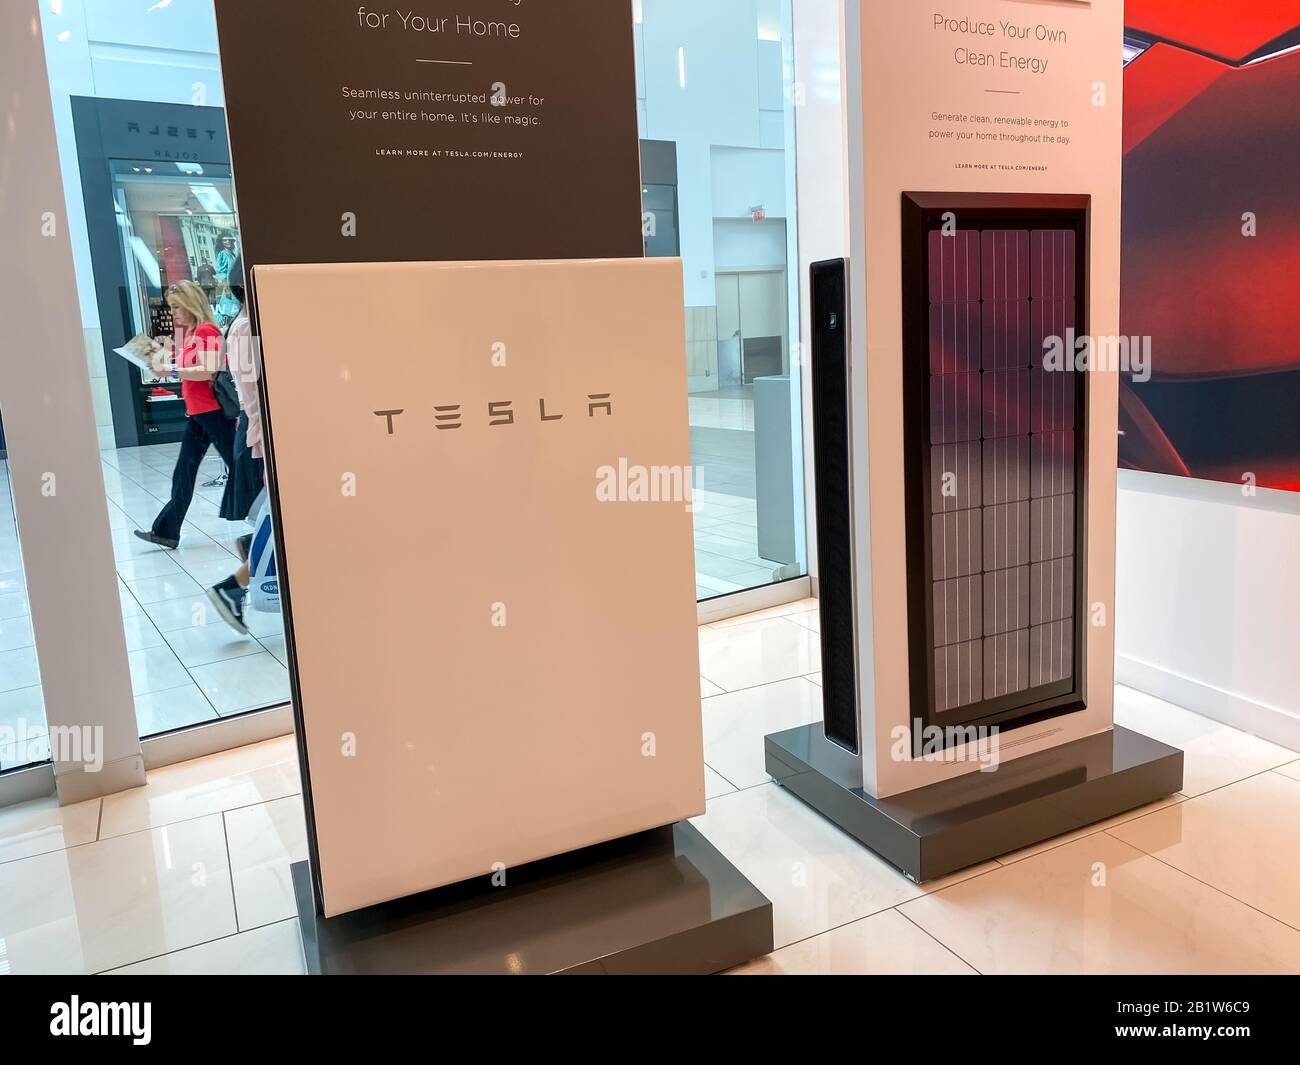 Orlando, FL/USA-2/17/20: A Tesla Battery Powerwall at the Tesla dealership  in Orlando, FL. Tesla, Inc. is an American automotive and energy company t  Stock Photo - Alamy